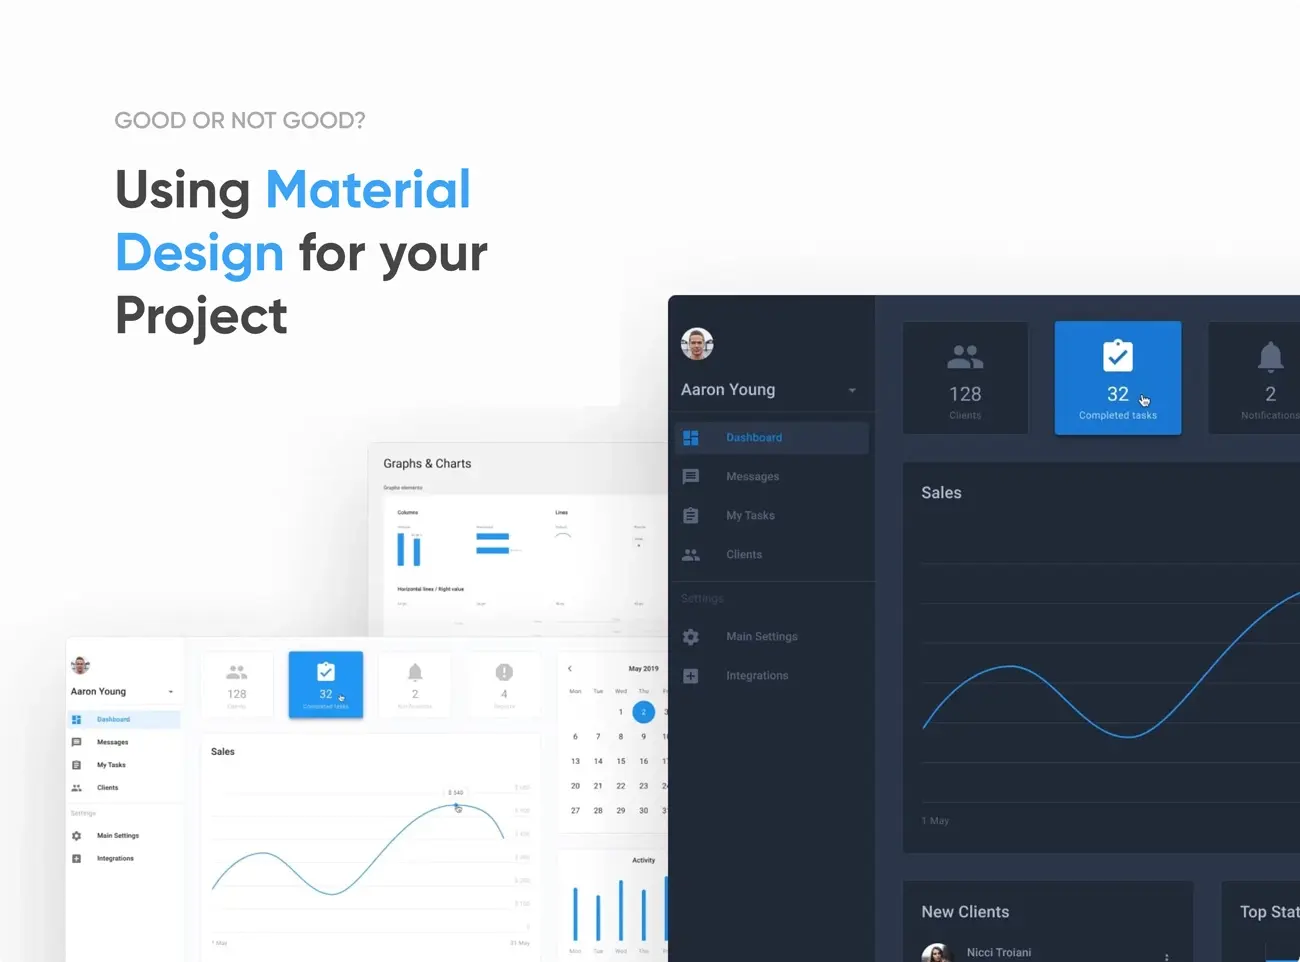 How to Use Material Design in Next Project?